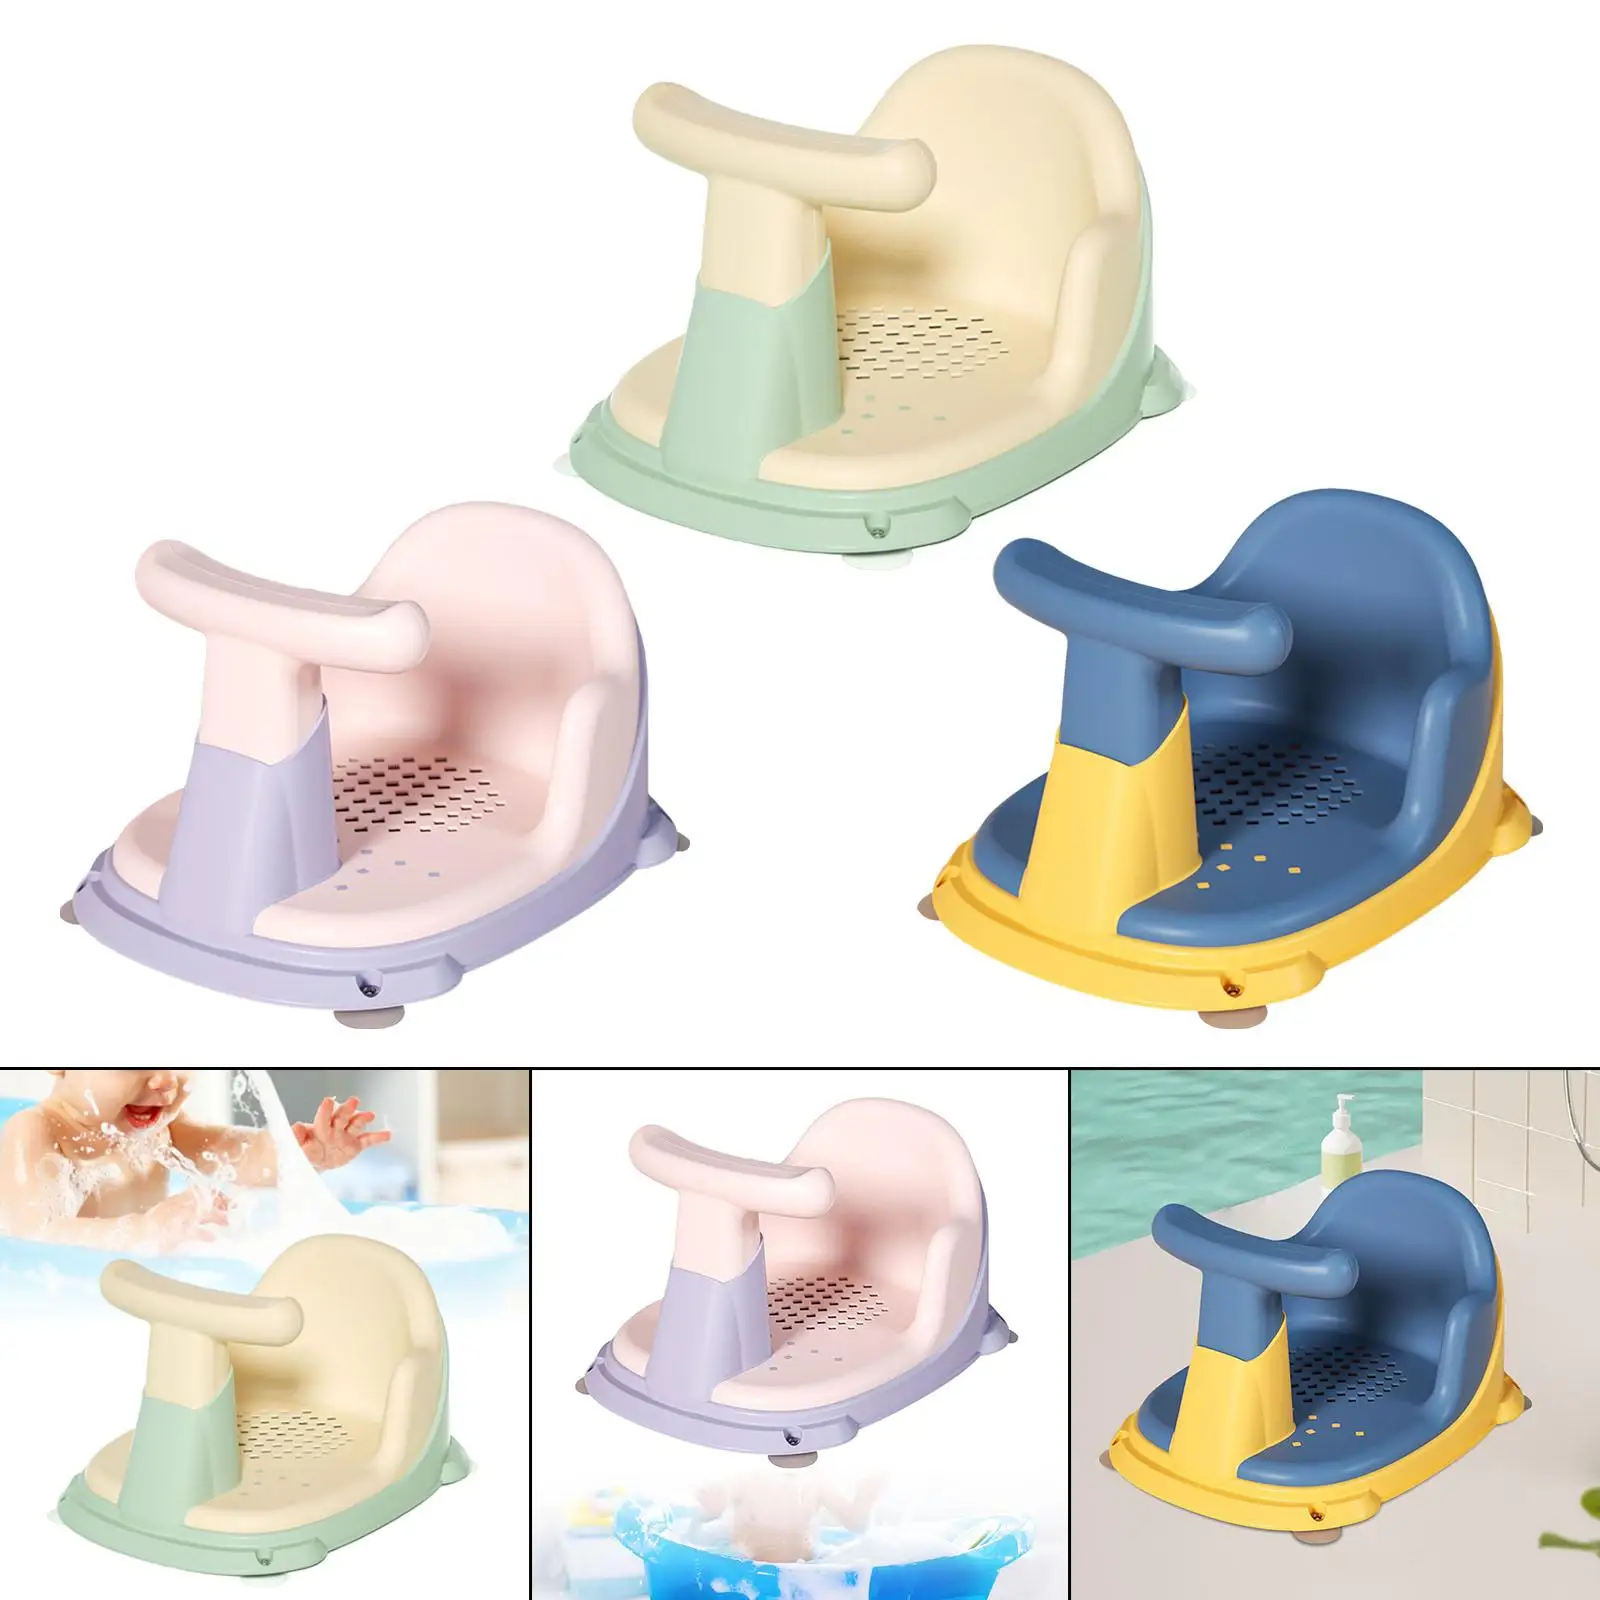 Cute Bath Tub Seat Support Tub Sitting up with Suction Cup Non Slip for Newborn Girls Boys